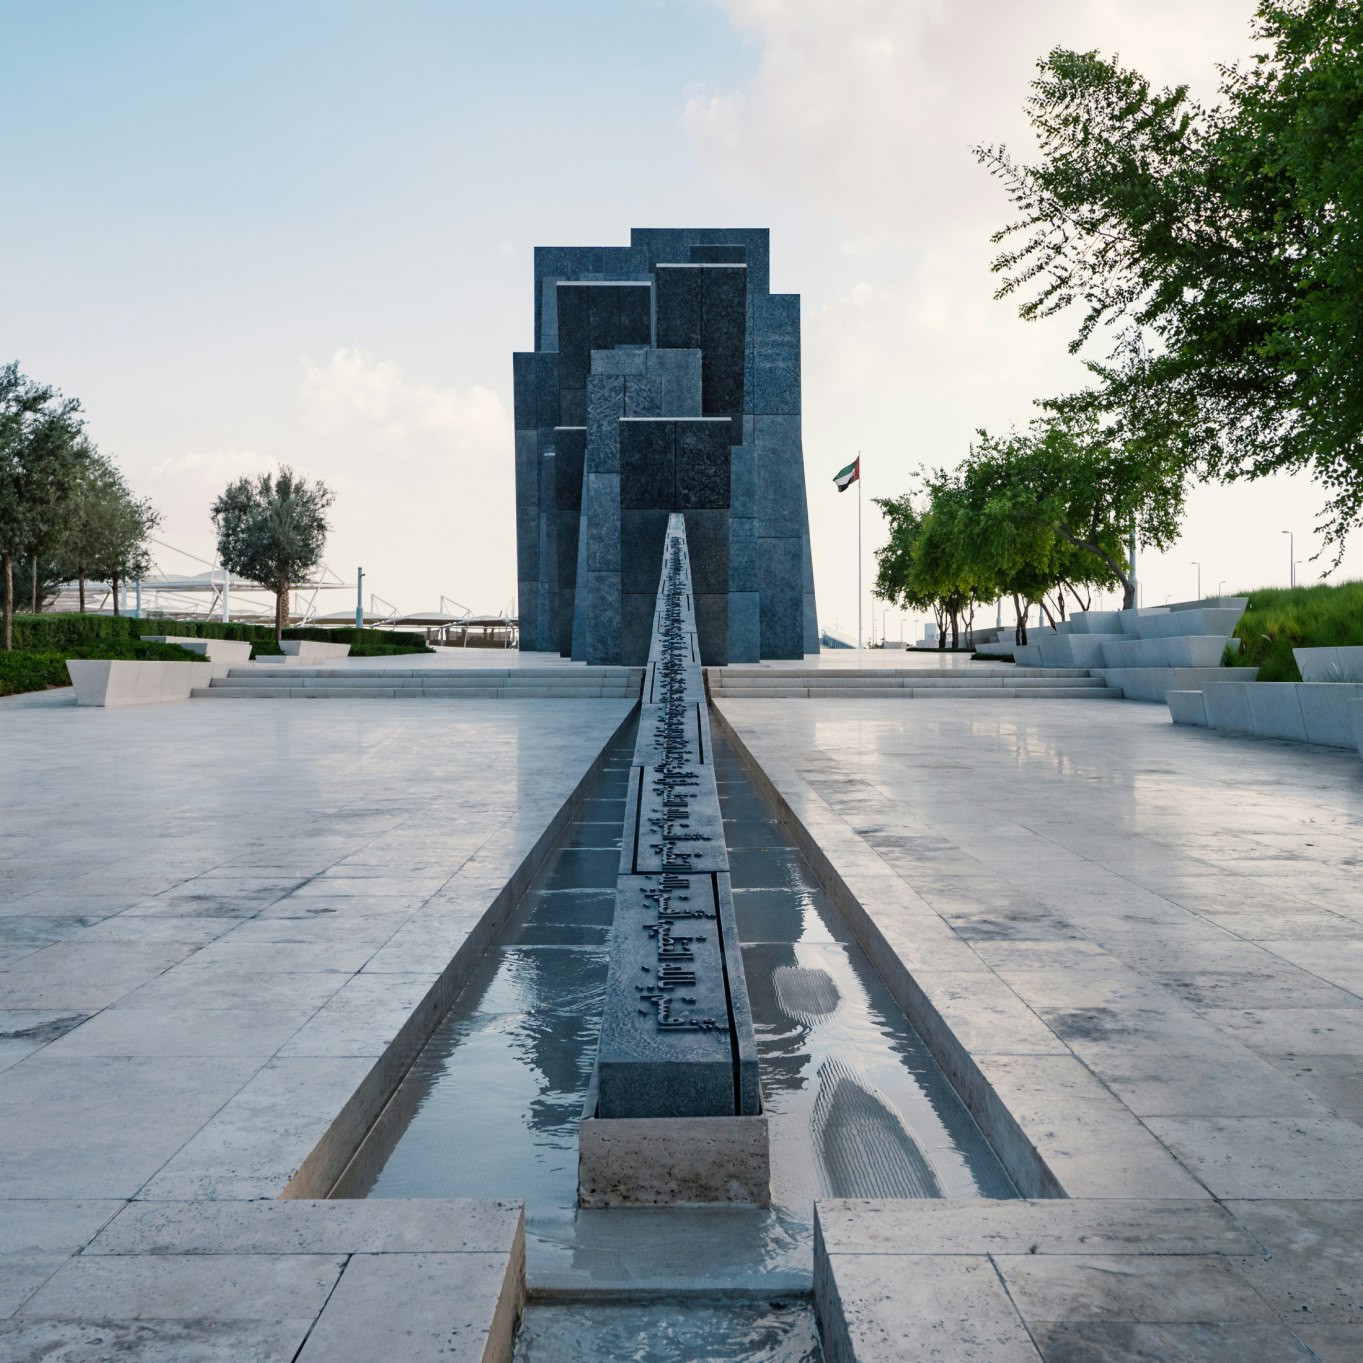 ABU DHABI, UAE - OCTOBER, 2018: Wahat Al Karama (Oasis of Dignity), permanent memorial for its martyrs, and Shaikh Zayed Grand Mosque.; Shutterstock ID 1243074628; Your name (First / Last): Lauren Keith; GL account no.: 65050; Netsuite department name: Online Editorial; Full Product or Project name including edition: Free things Abu Dhabi article